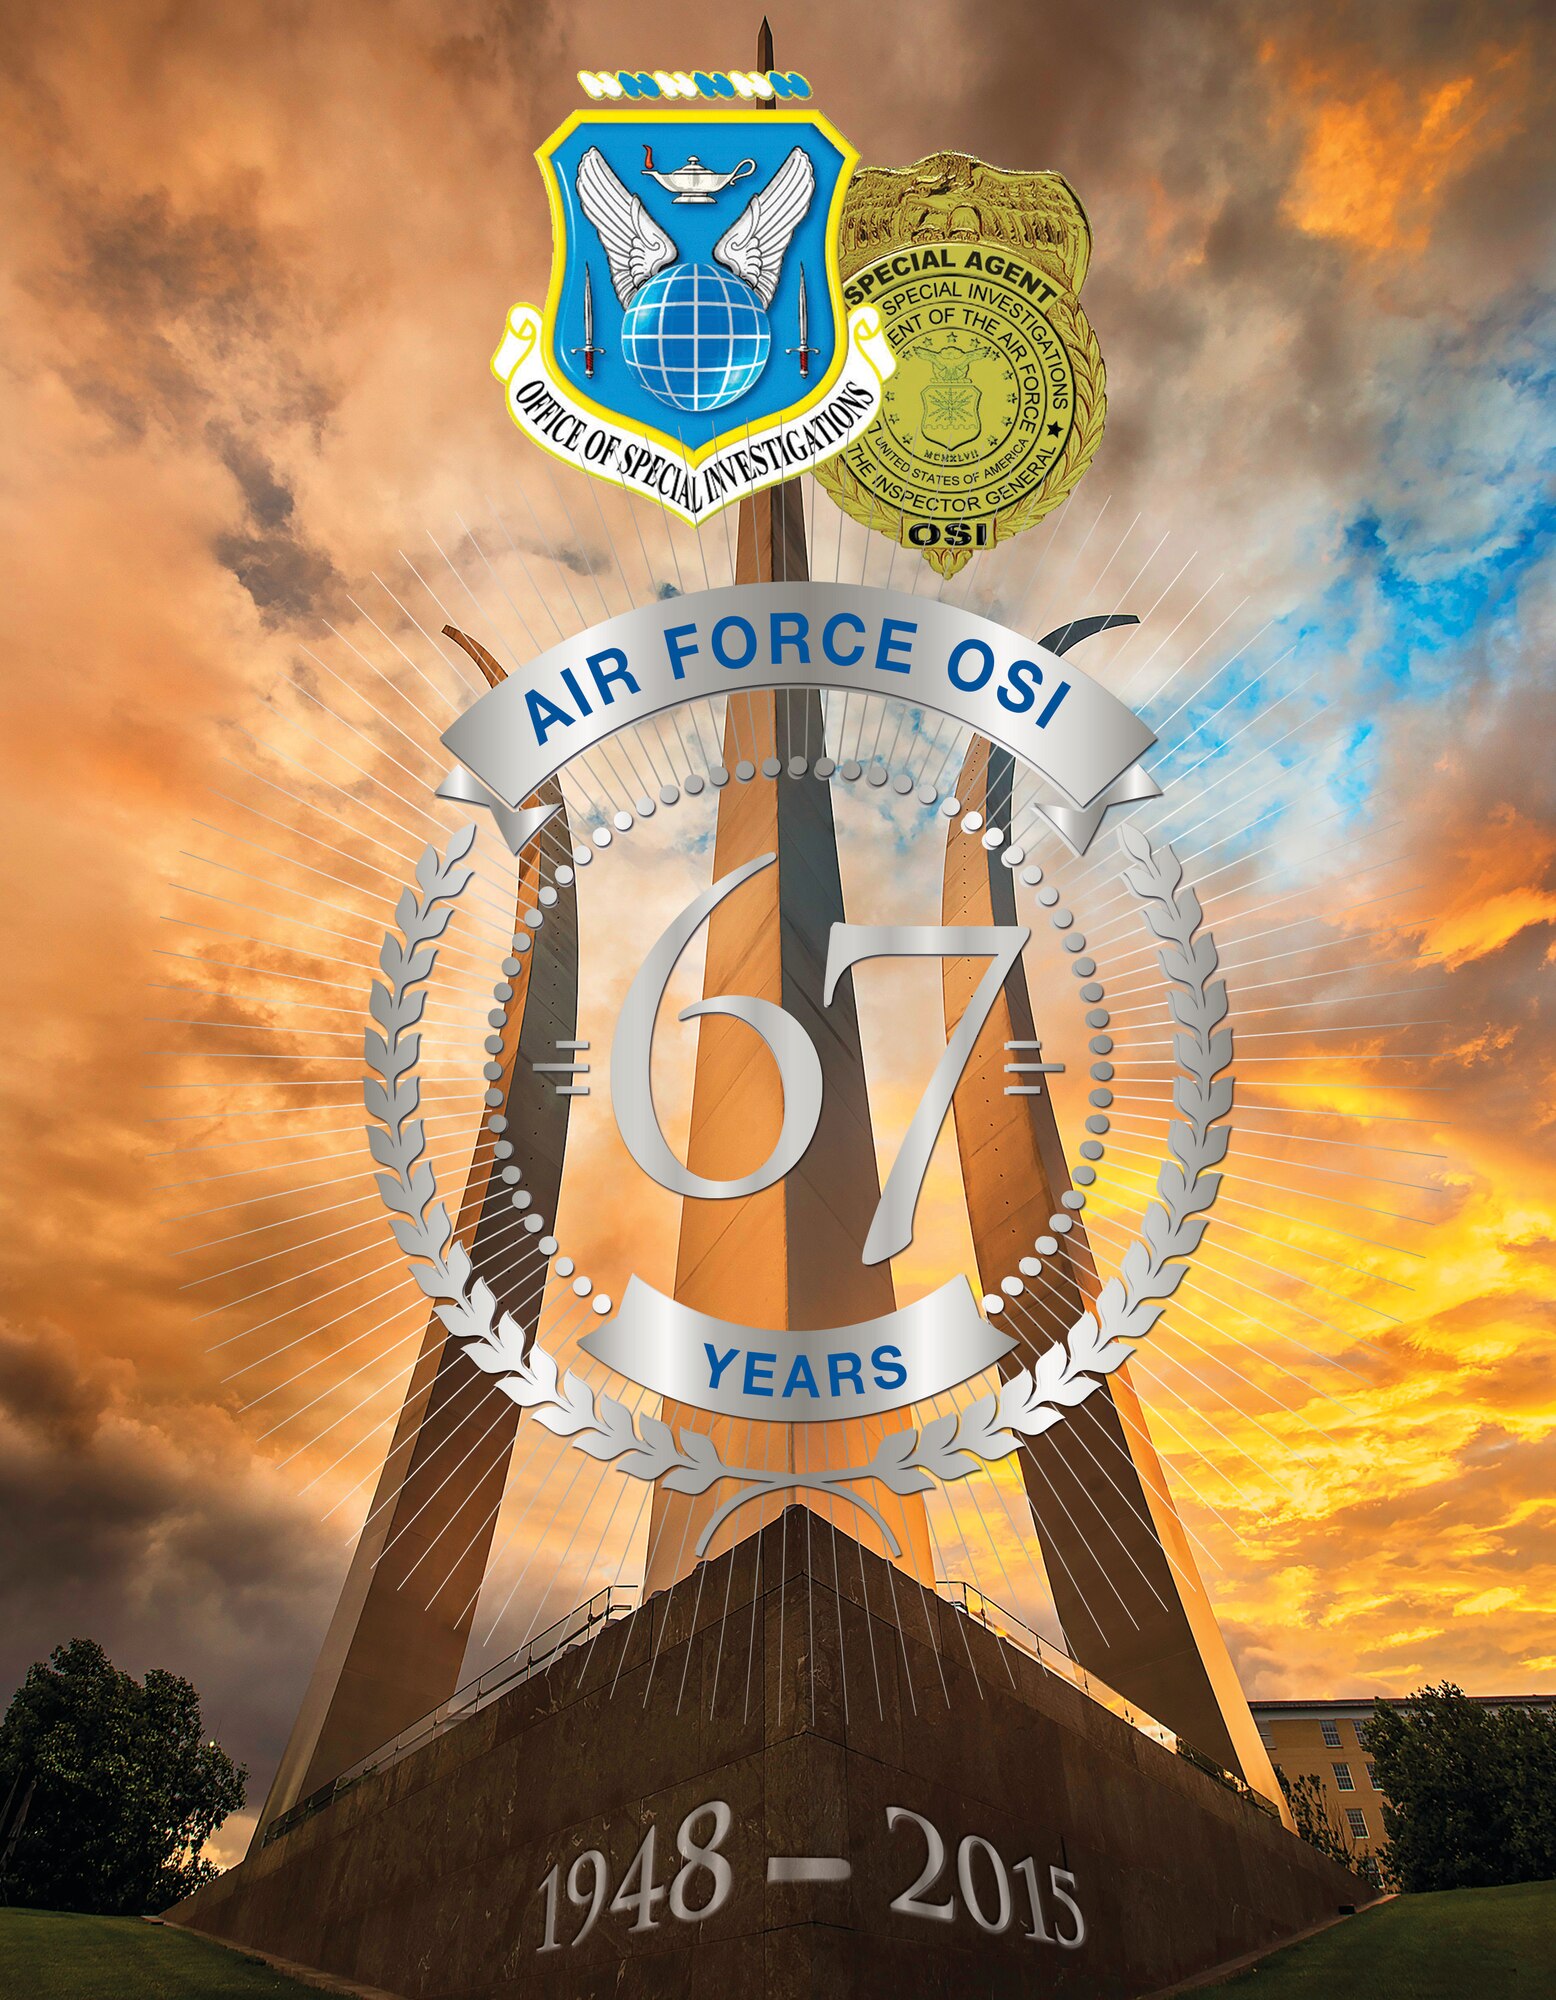 The Air Force Office of Special Investigations celebrates its 67th birthday as a premier federal law enforcement agency August 1, 2015. 